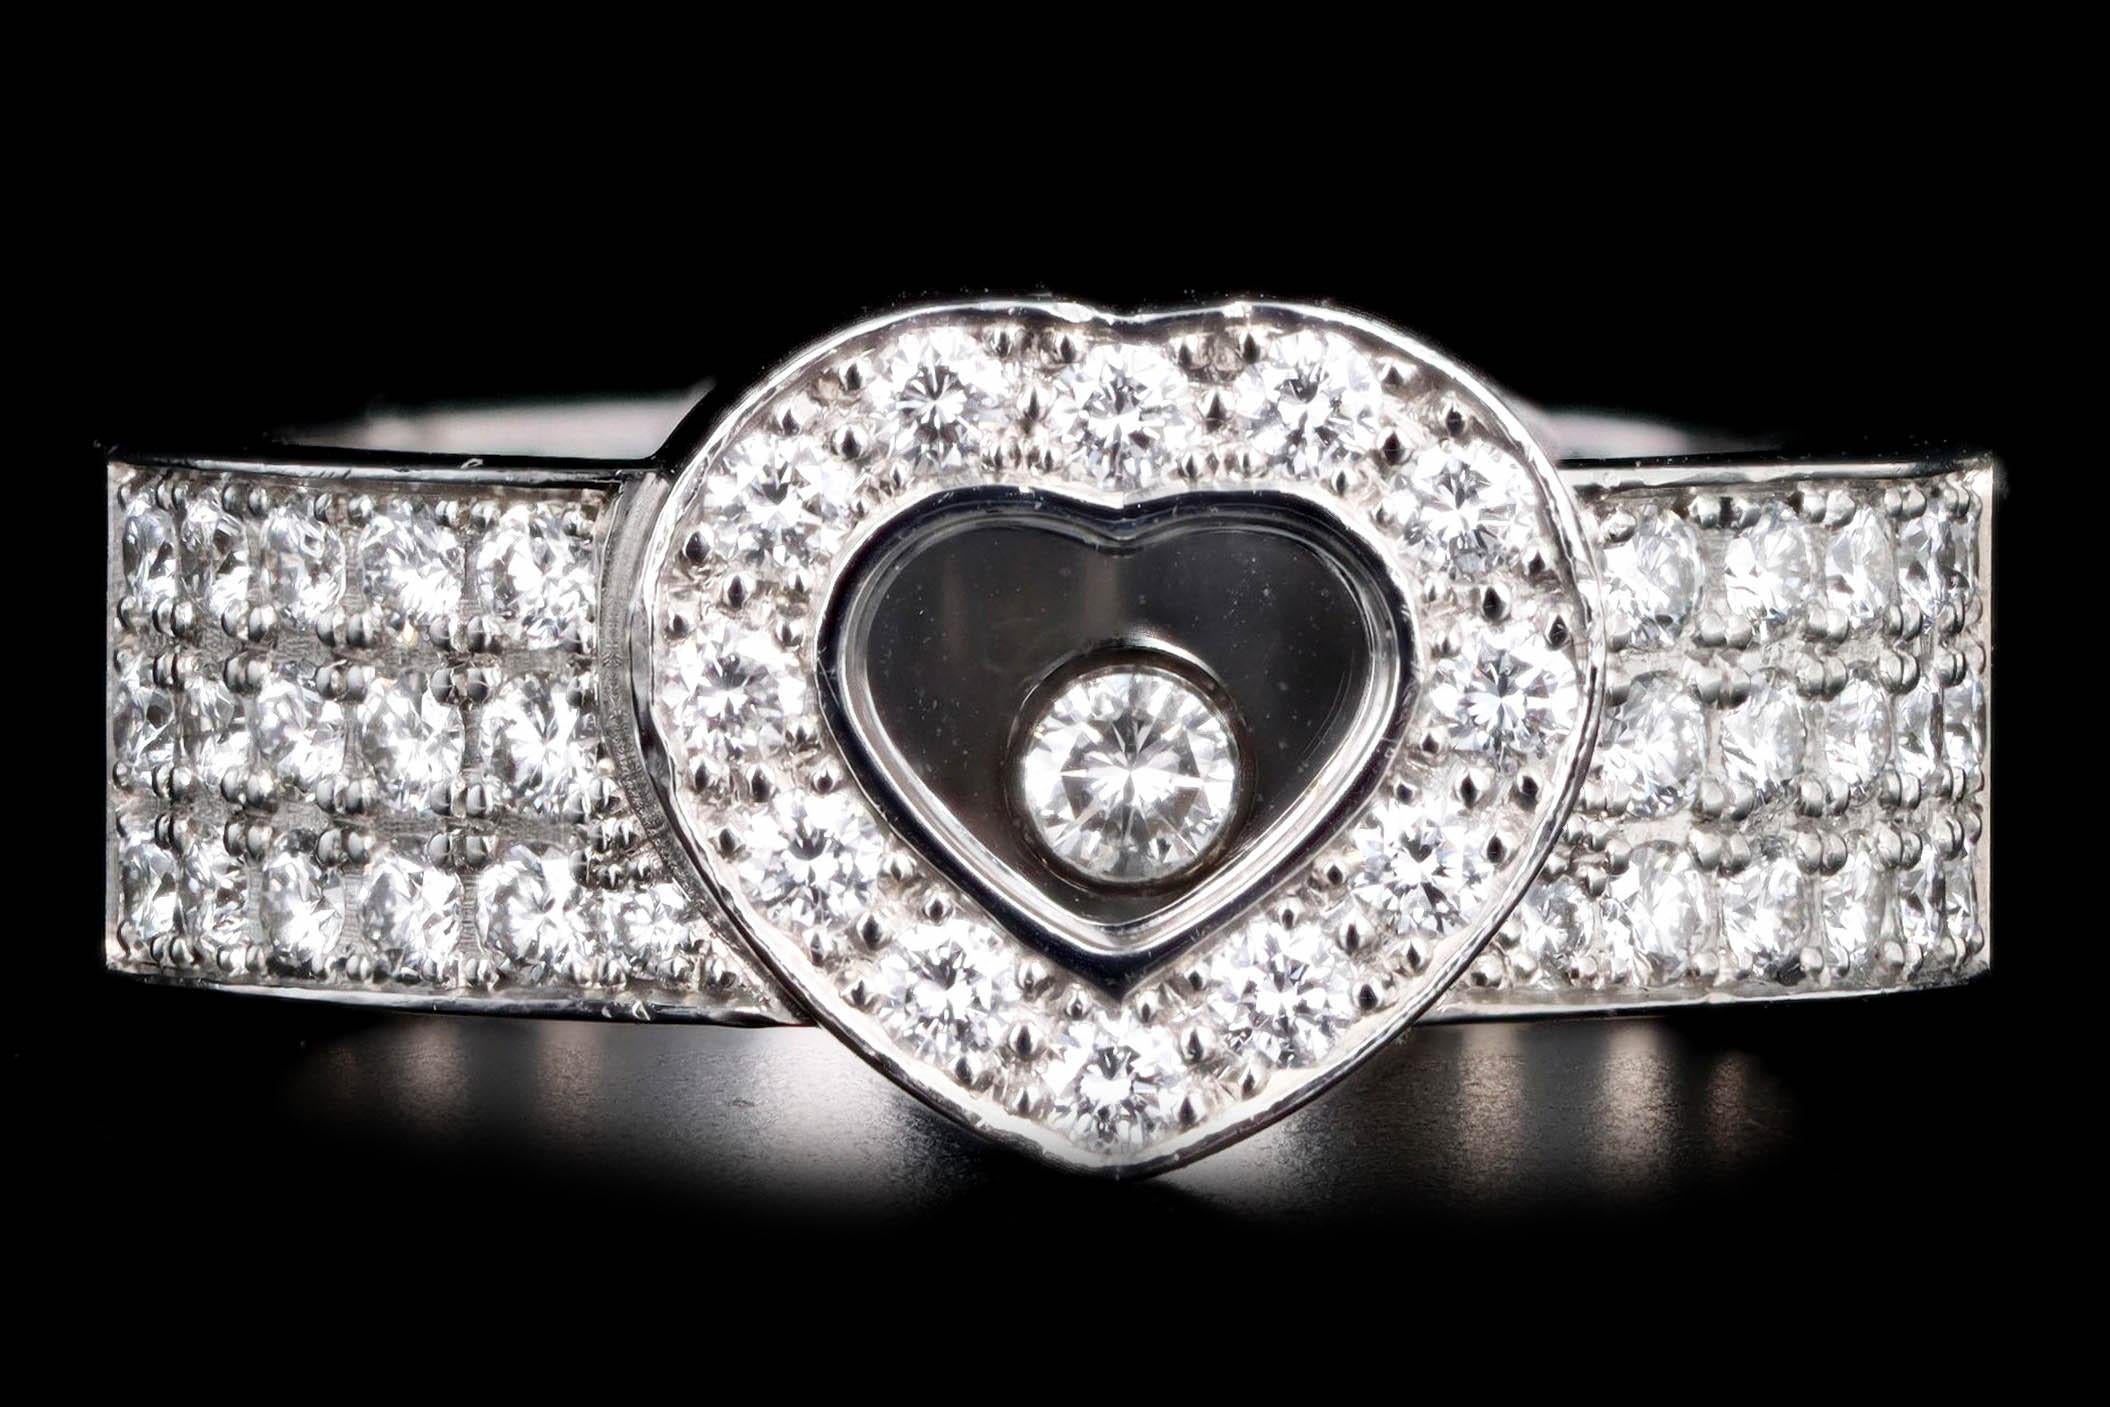 Era: Modern

Designer: Chopard

Composition: 18K White Gold

Primary Stone: Forty Three Round Brilliant Cut Diamonds

Total Carat Weight: Approximately 0.75 Carats

Color/Clarity: G-H / VS1-2

Ring Size: 6.25

Ring Weight: 12.4 Grams

Item Barcode: